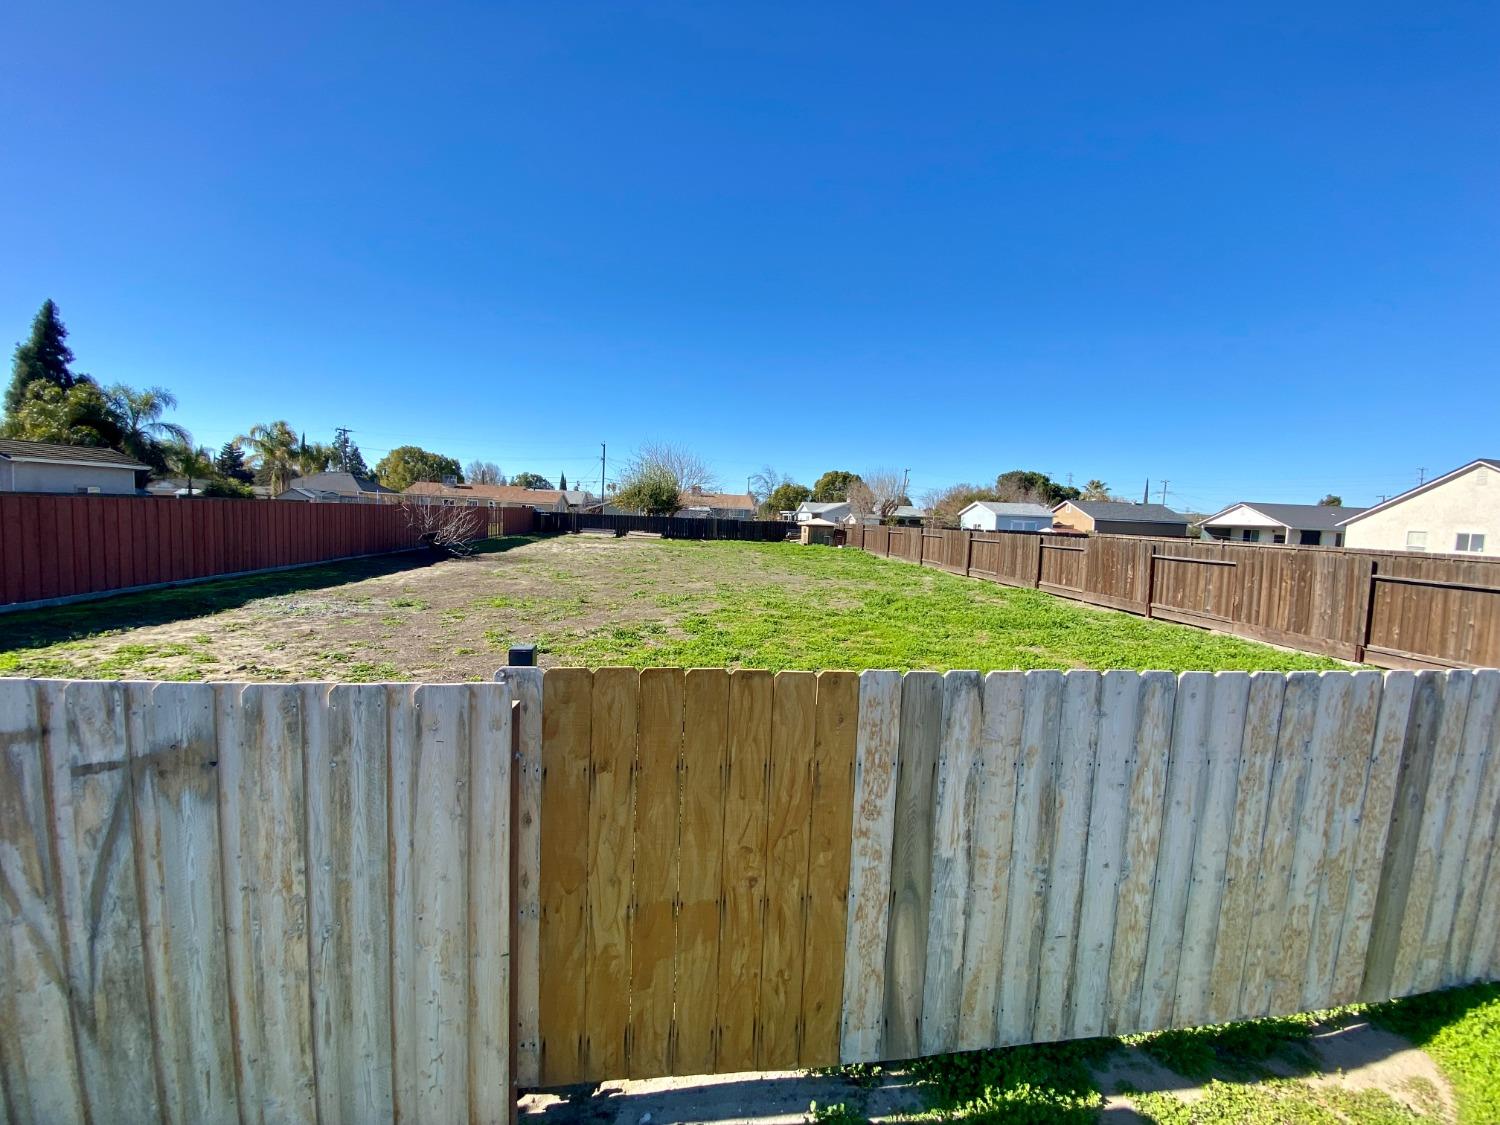 a view of a backyard with a wooden fence